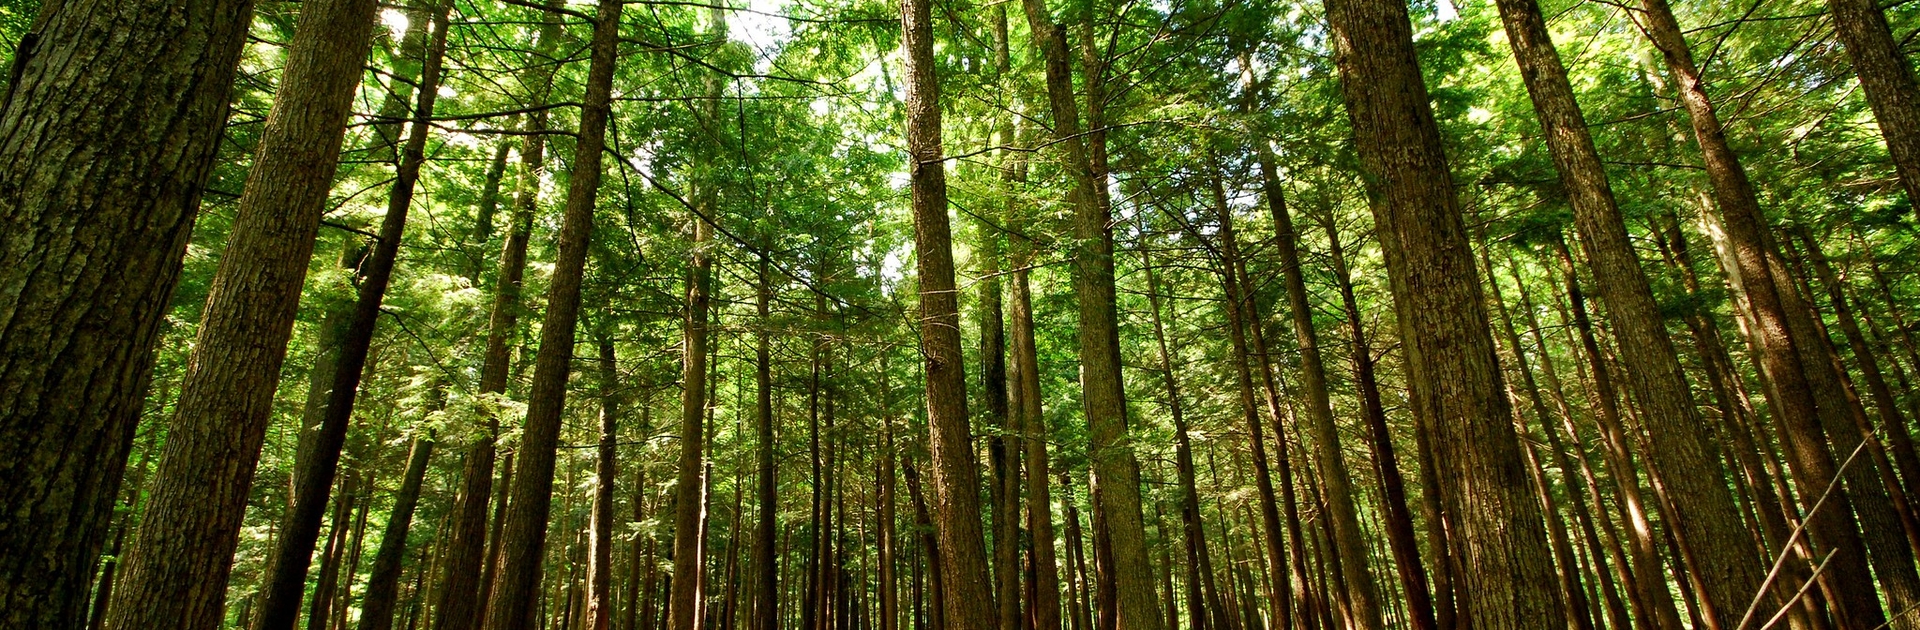 Image of an eastern hemlock forest